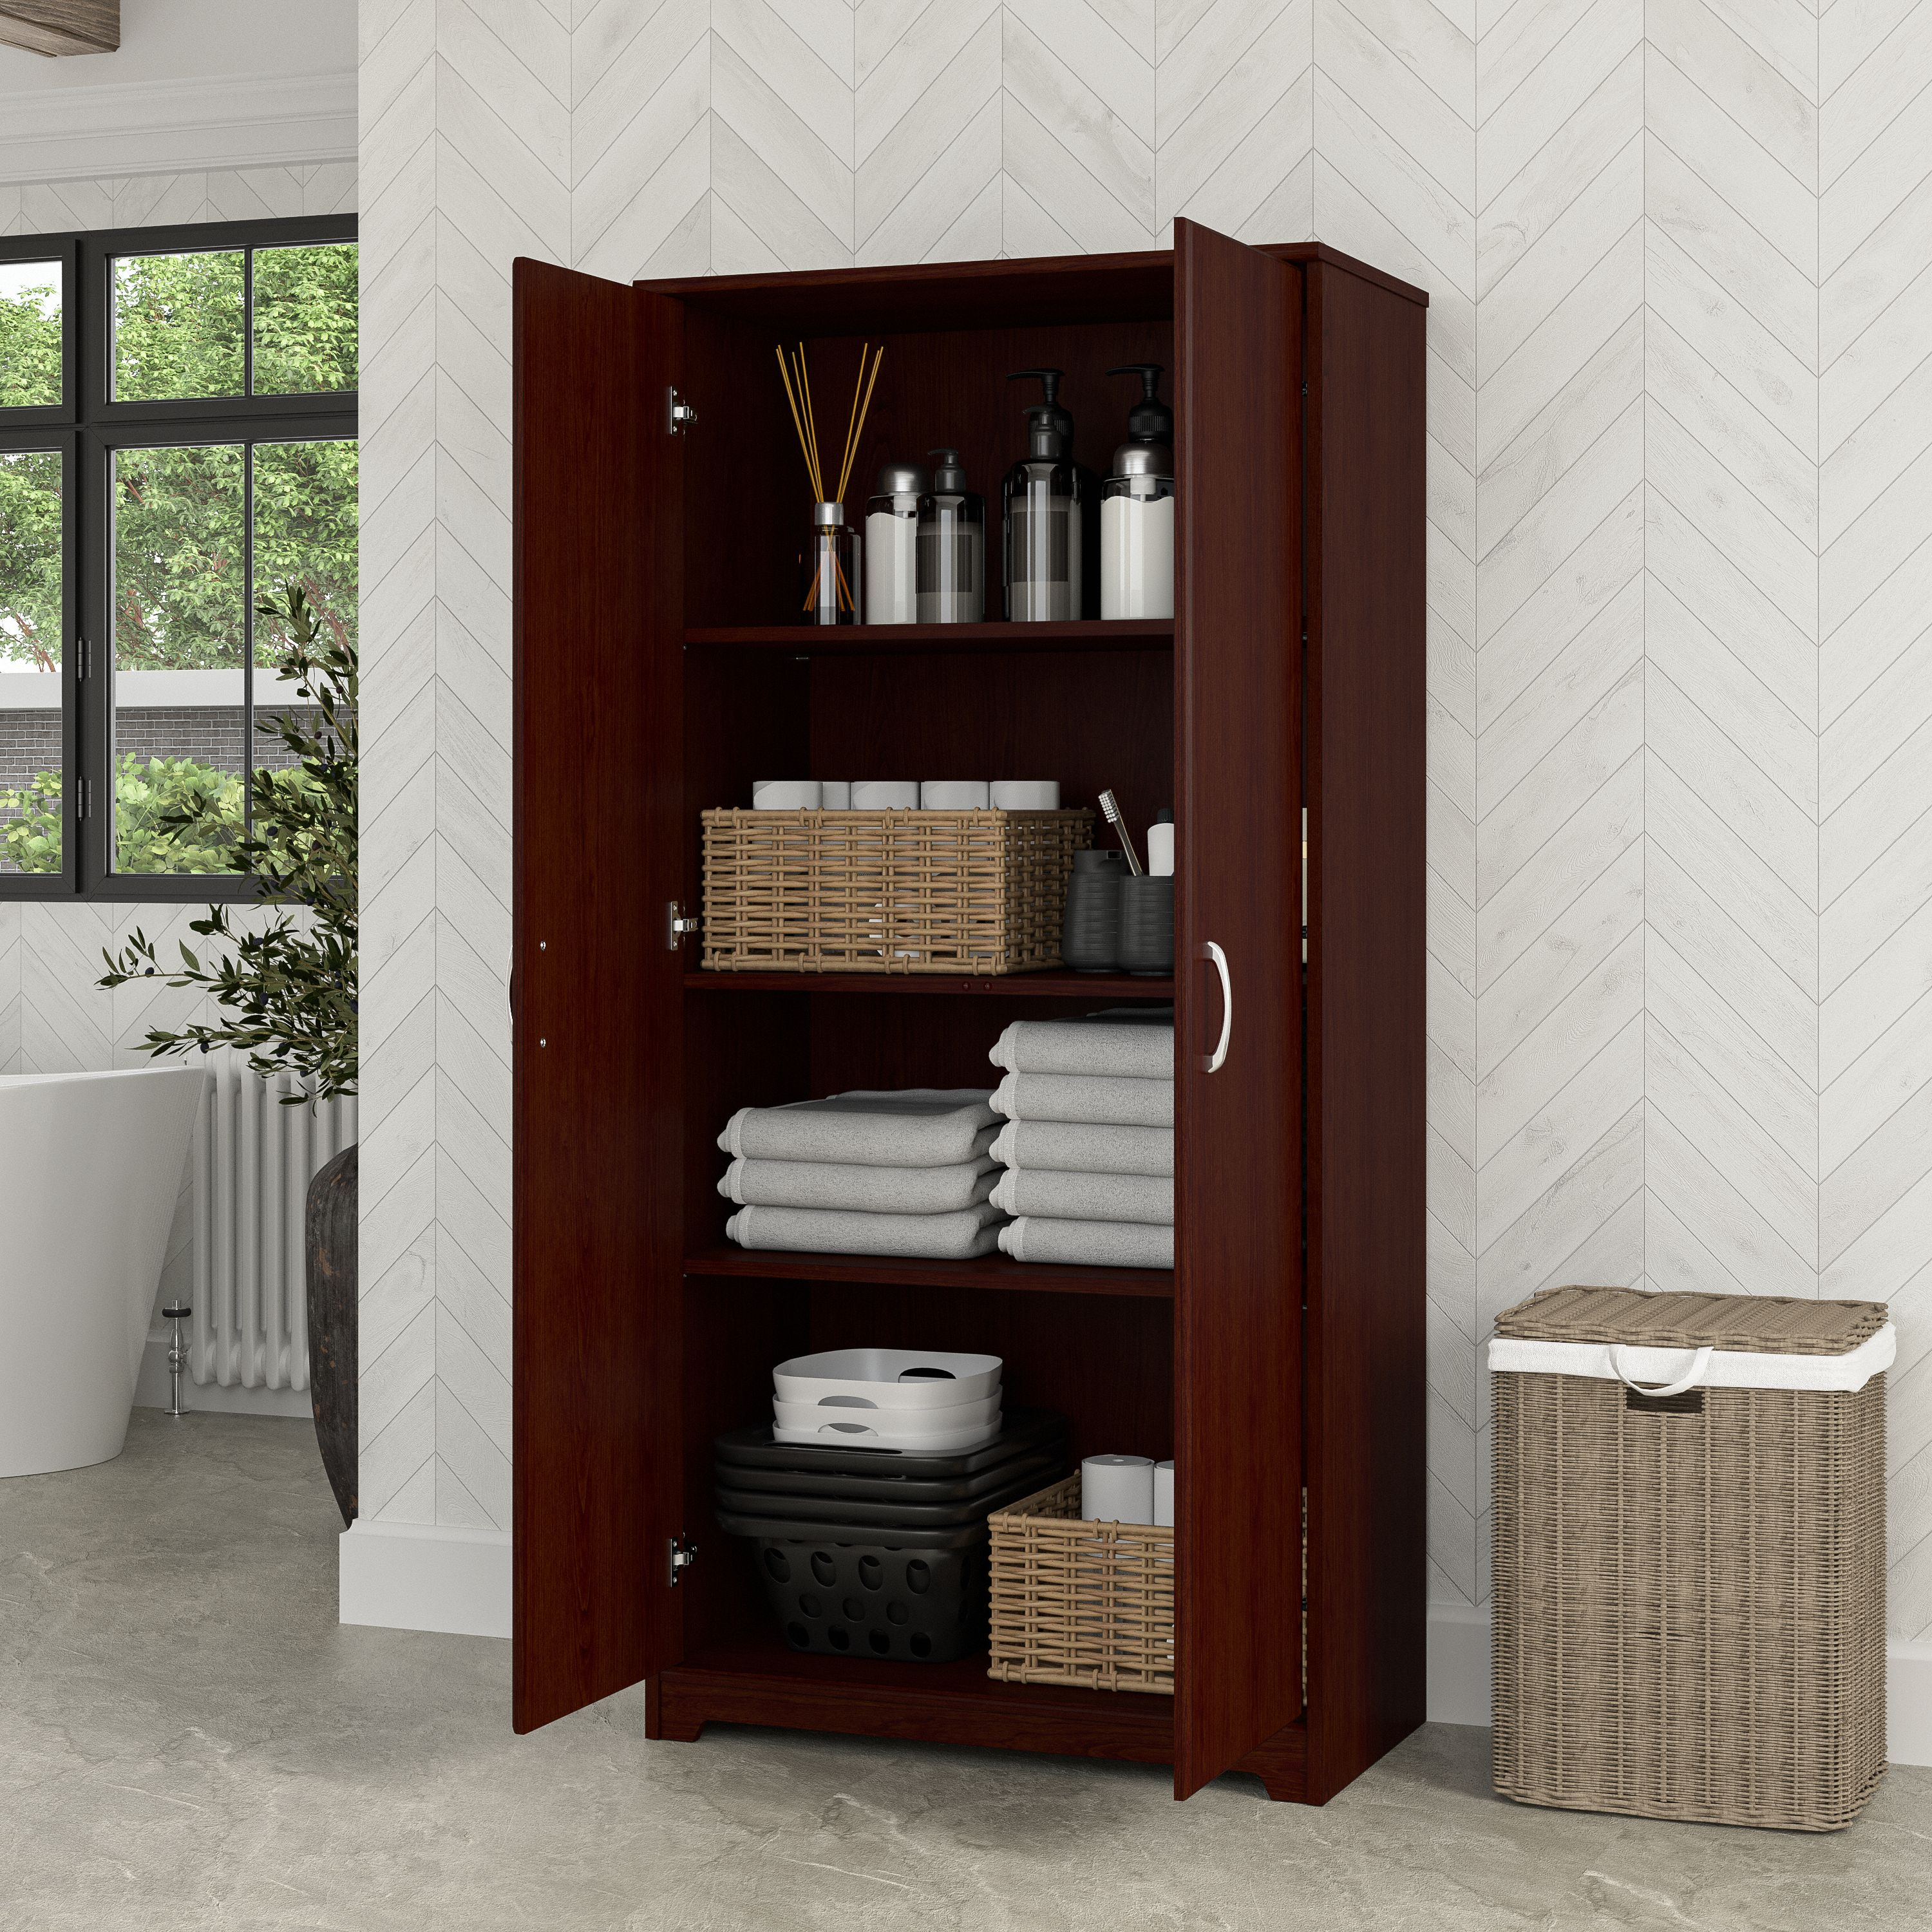 Shop Bush Furniture Cabot Tall Bathroom Storage Cabinet with Doors 06 WC31499-Z1 #color_harvest cherry